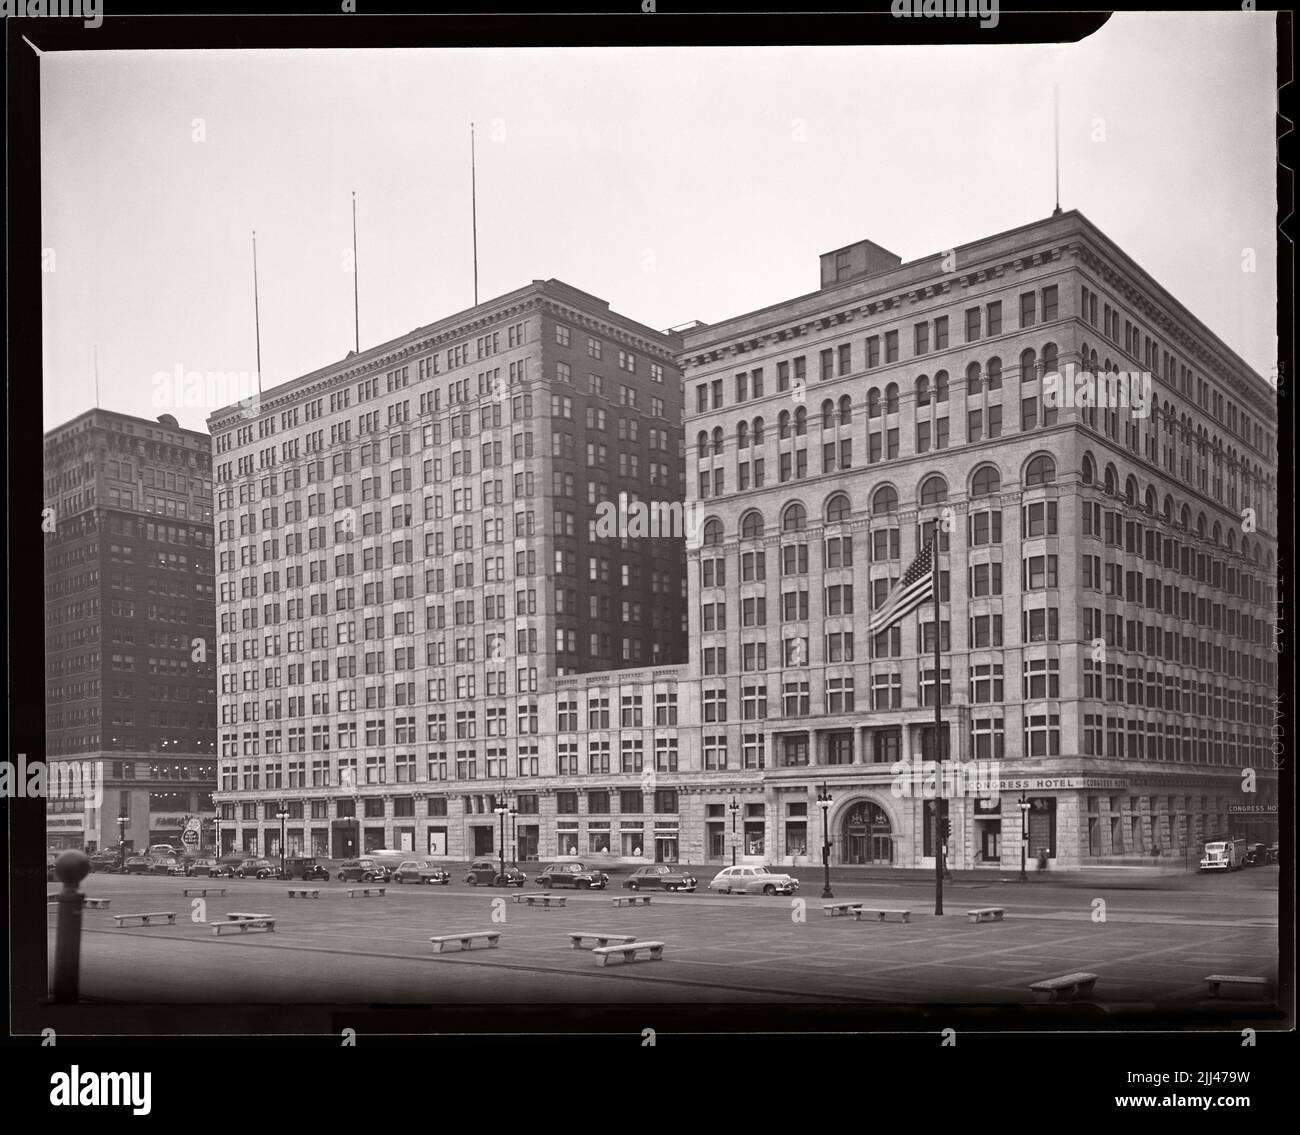 Congress Plaza Hotel on Michigan Avenue in Chicago, Illinois. October 1, 1945.   Image from 4x5 inch negative Stock Photo